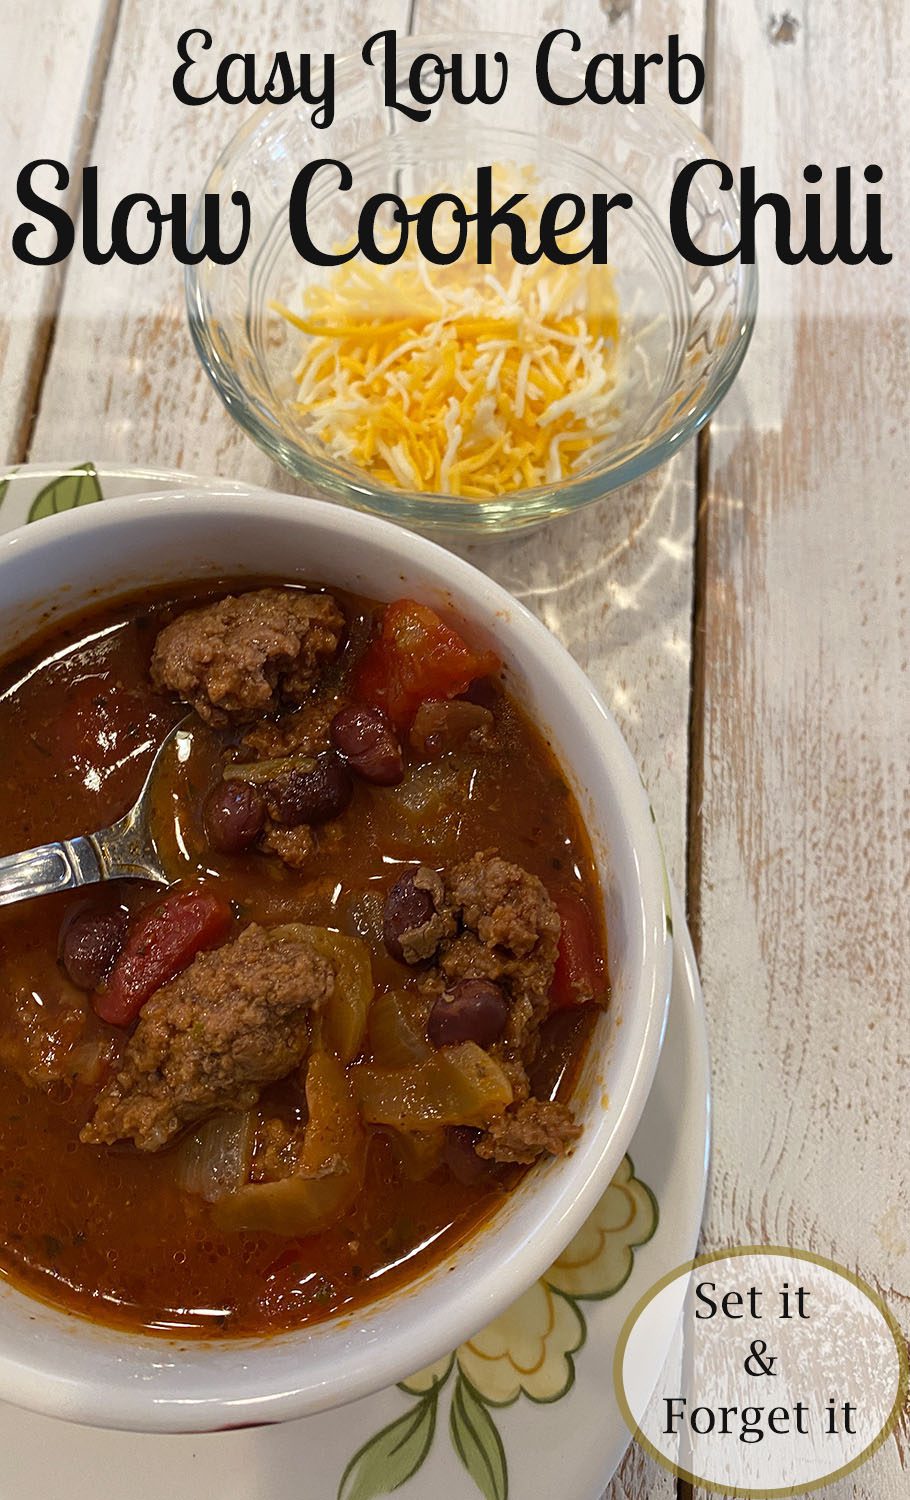 Bowl of Low Carb Chili